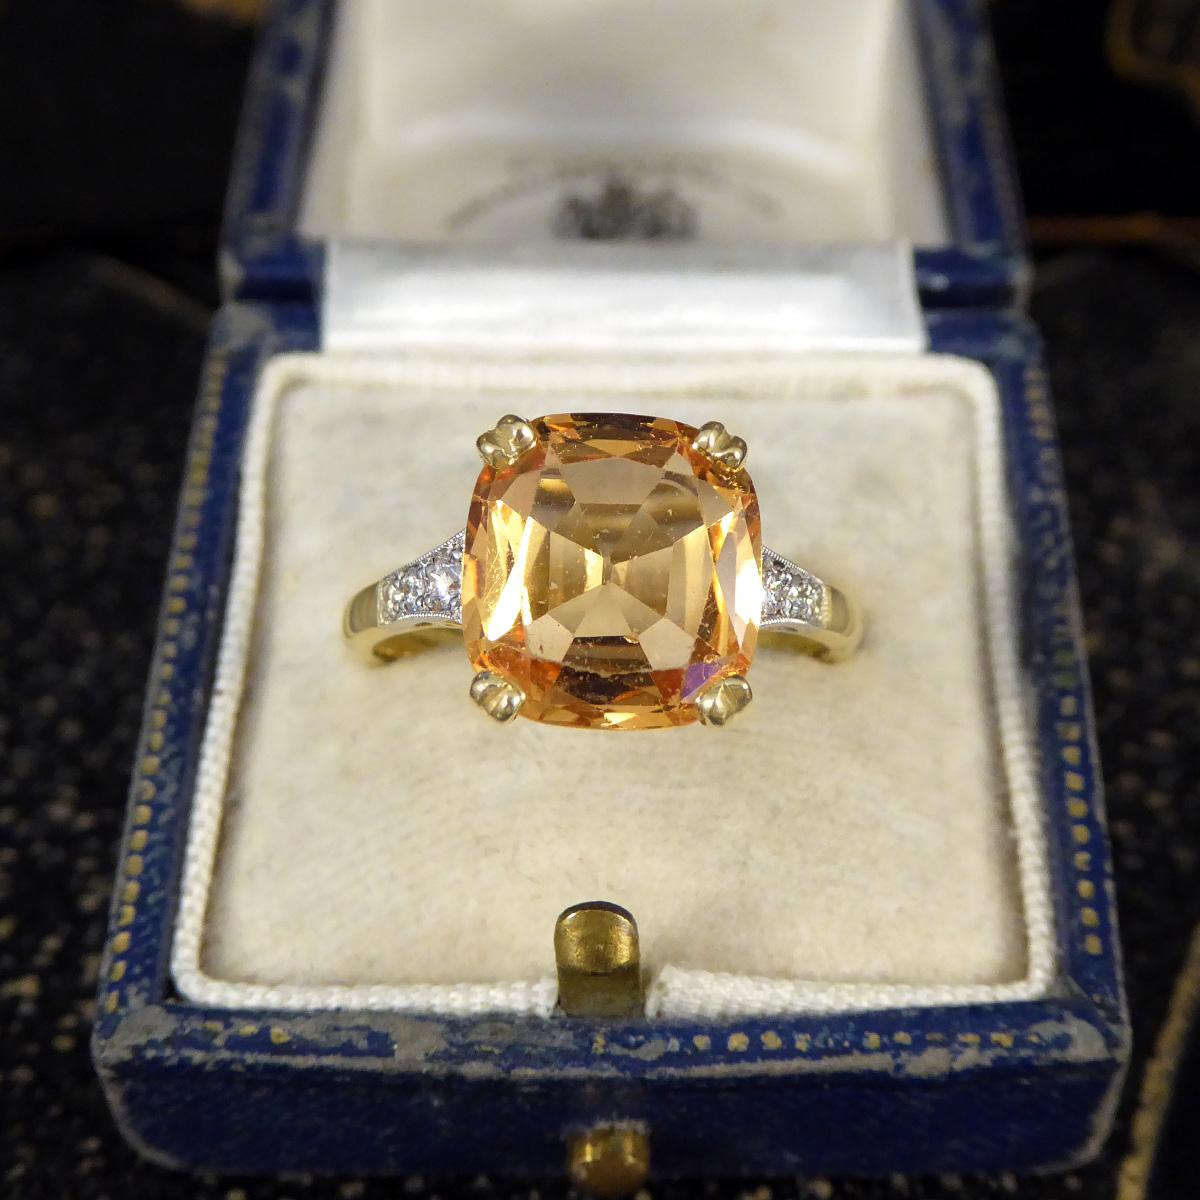 5.12ct Imperial Topaz Ring with Diamond Set Tapered Shoulders in 18ct Gold 1